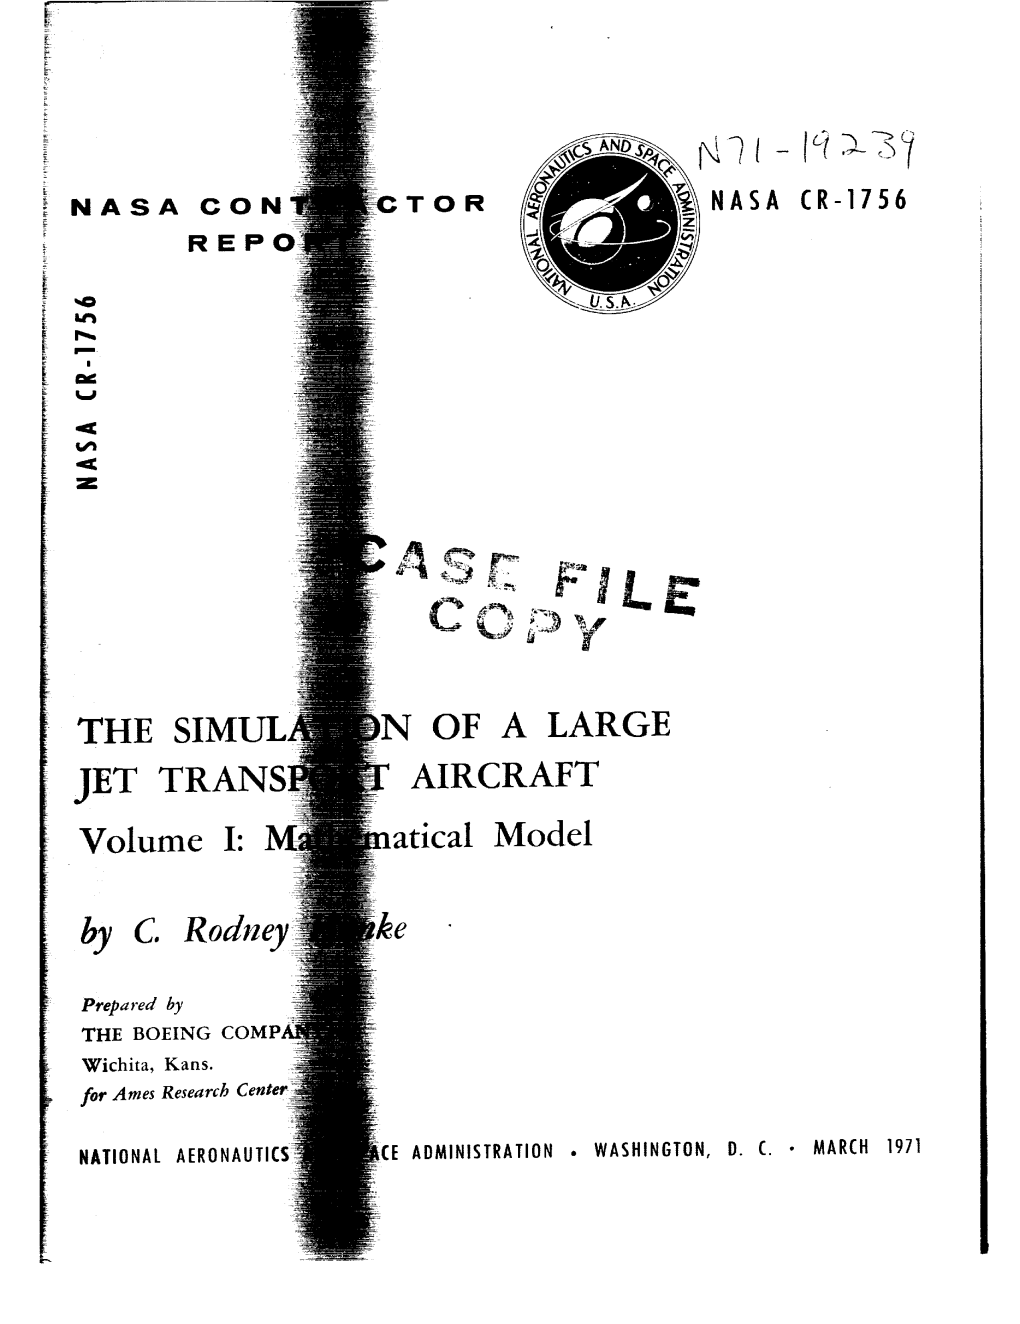 THE .JET Volume of a LARGE AIRCRAFT Ical Model Byc. R